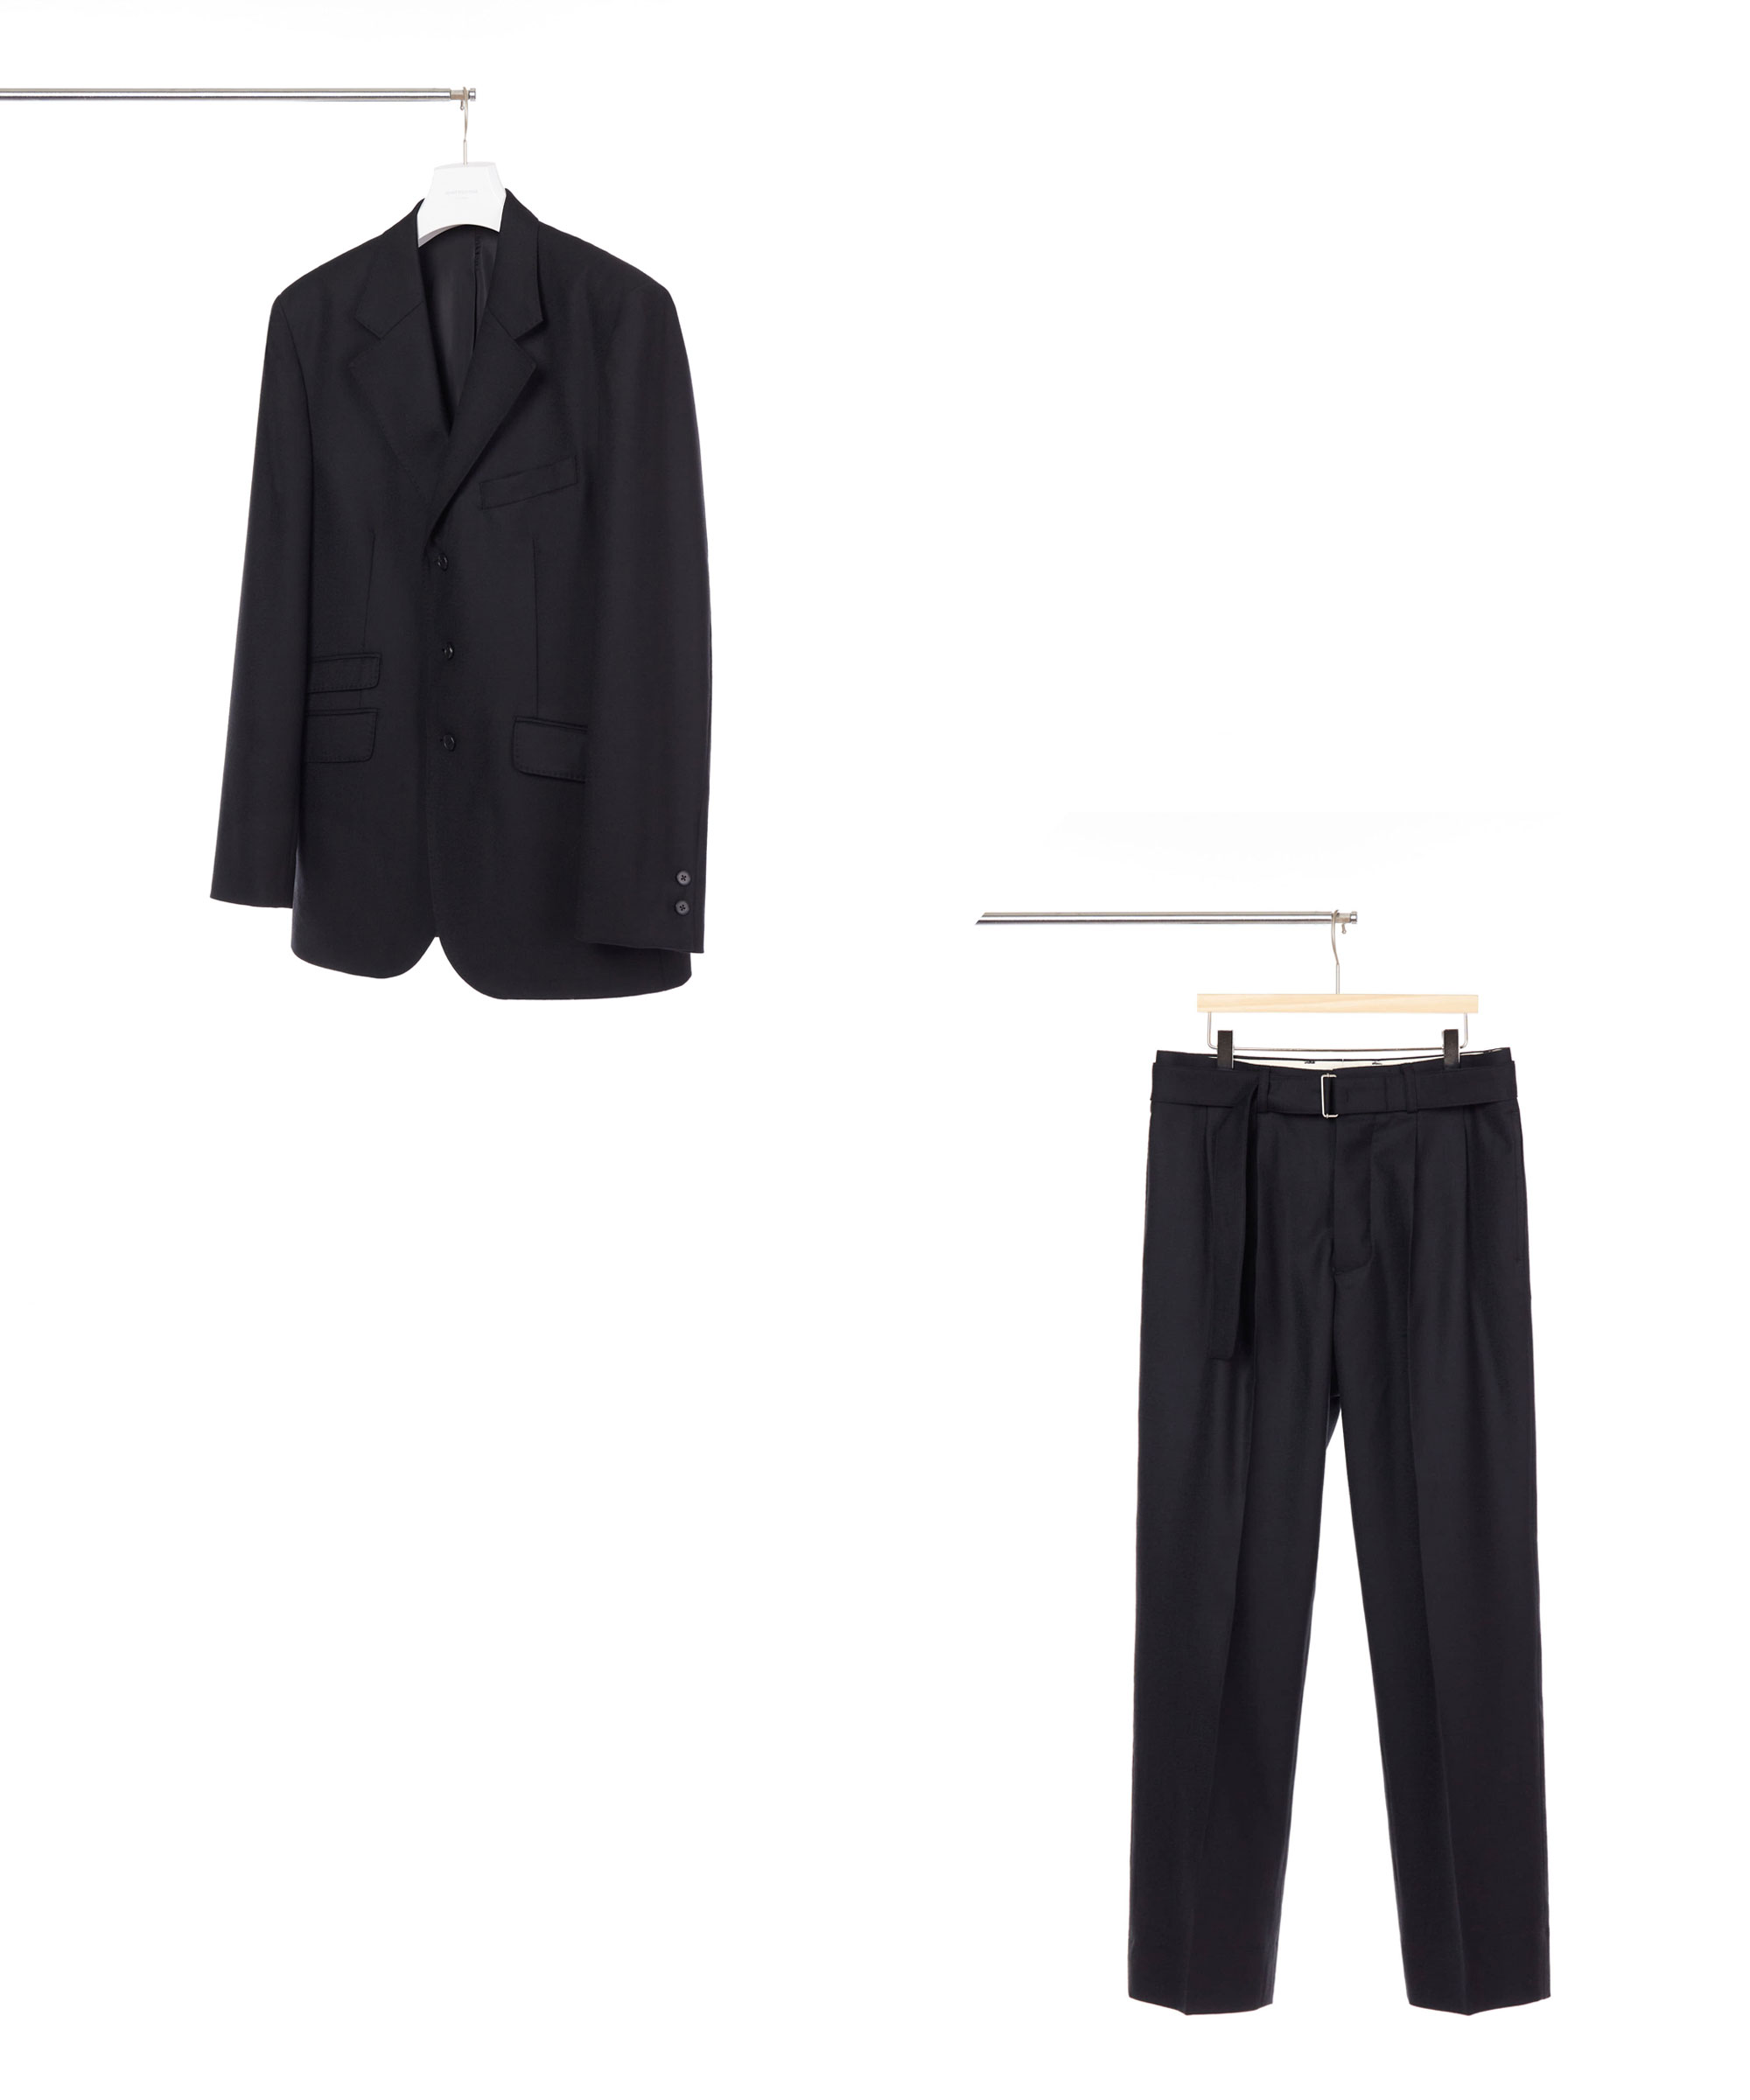 [SET-UP] SUPER 160S HIGHLAND WOOL FLANNEL BLACK 3ROLL 2BUTTON TAILORED BLAZER / BELTED PANTS 02-2